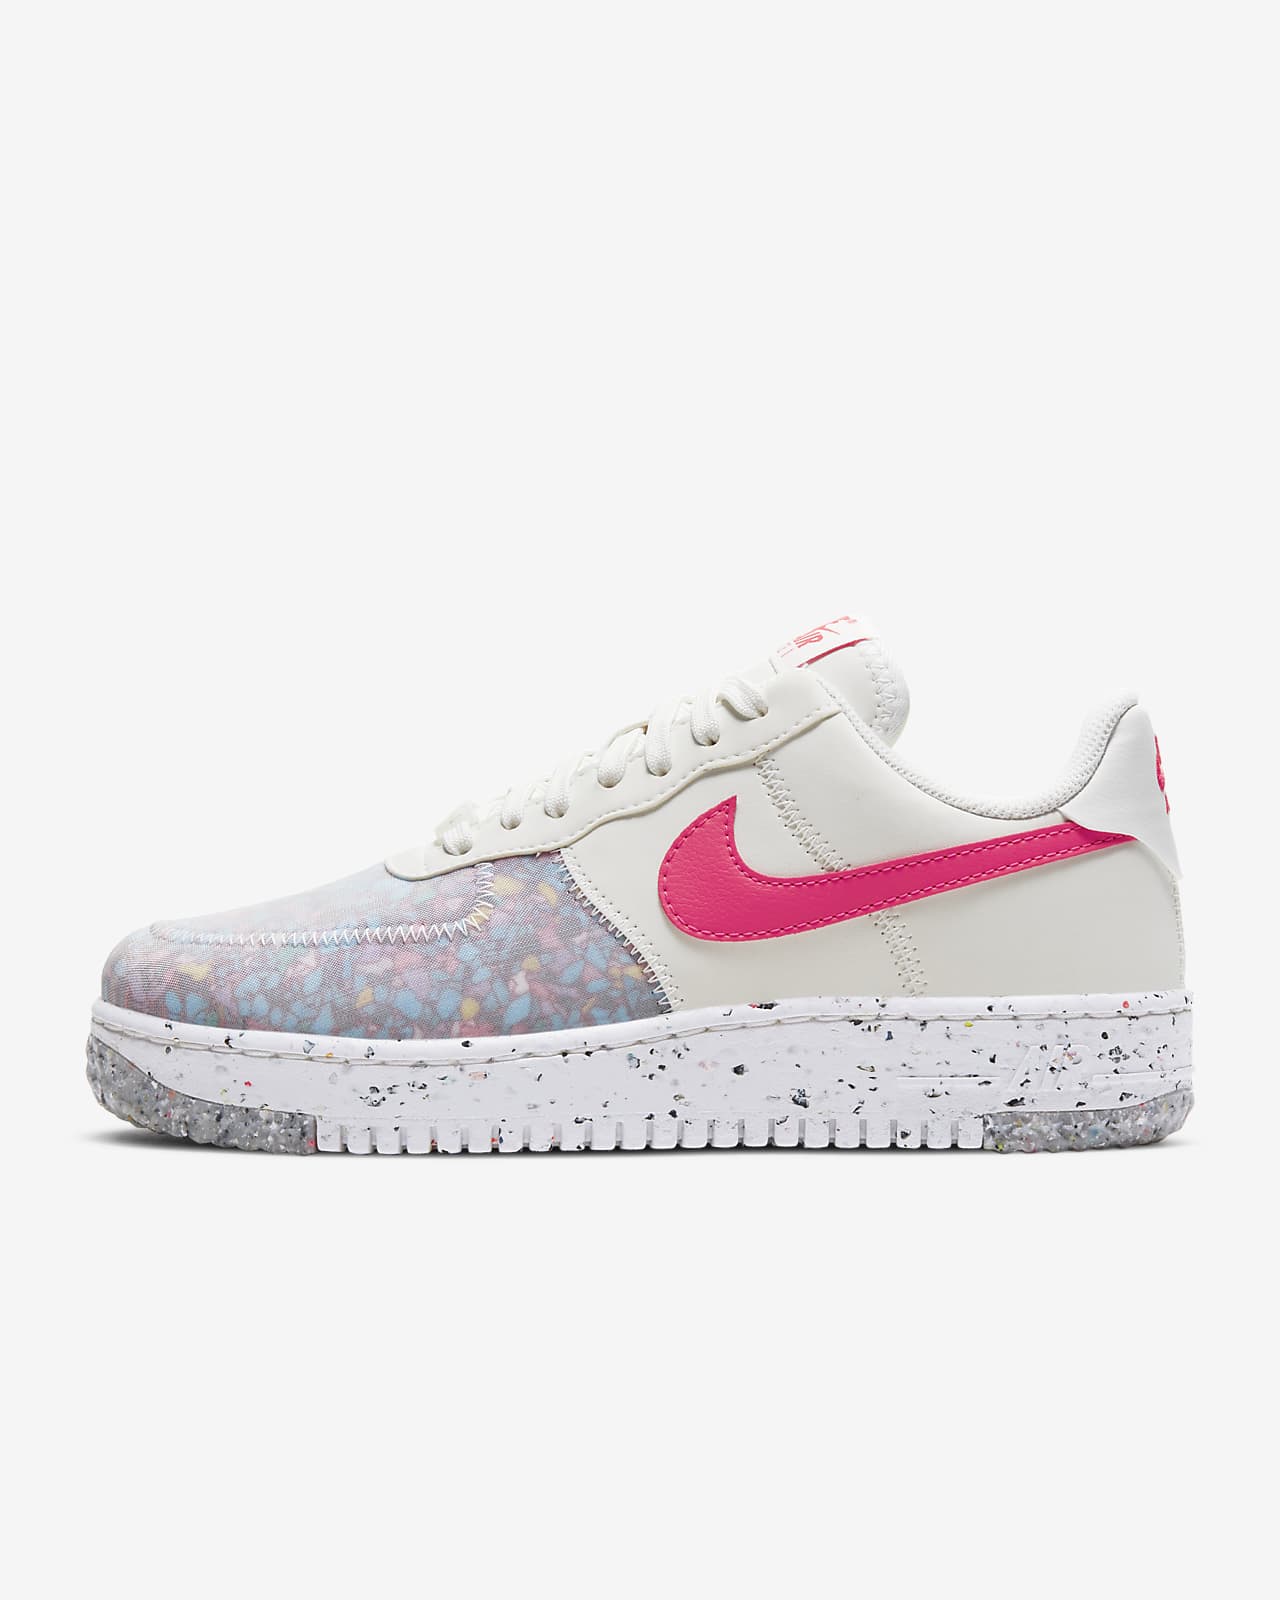 nike air force crater